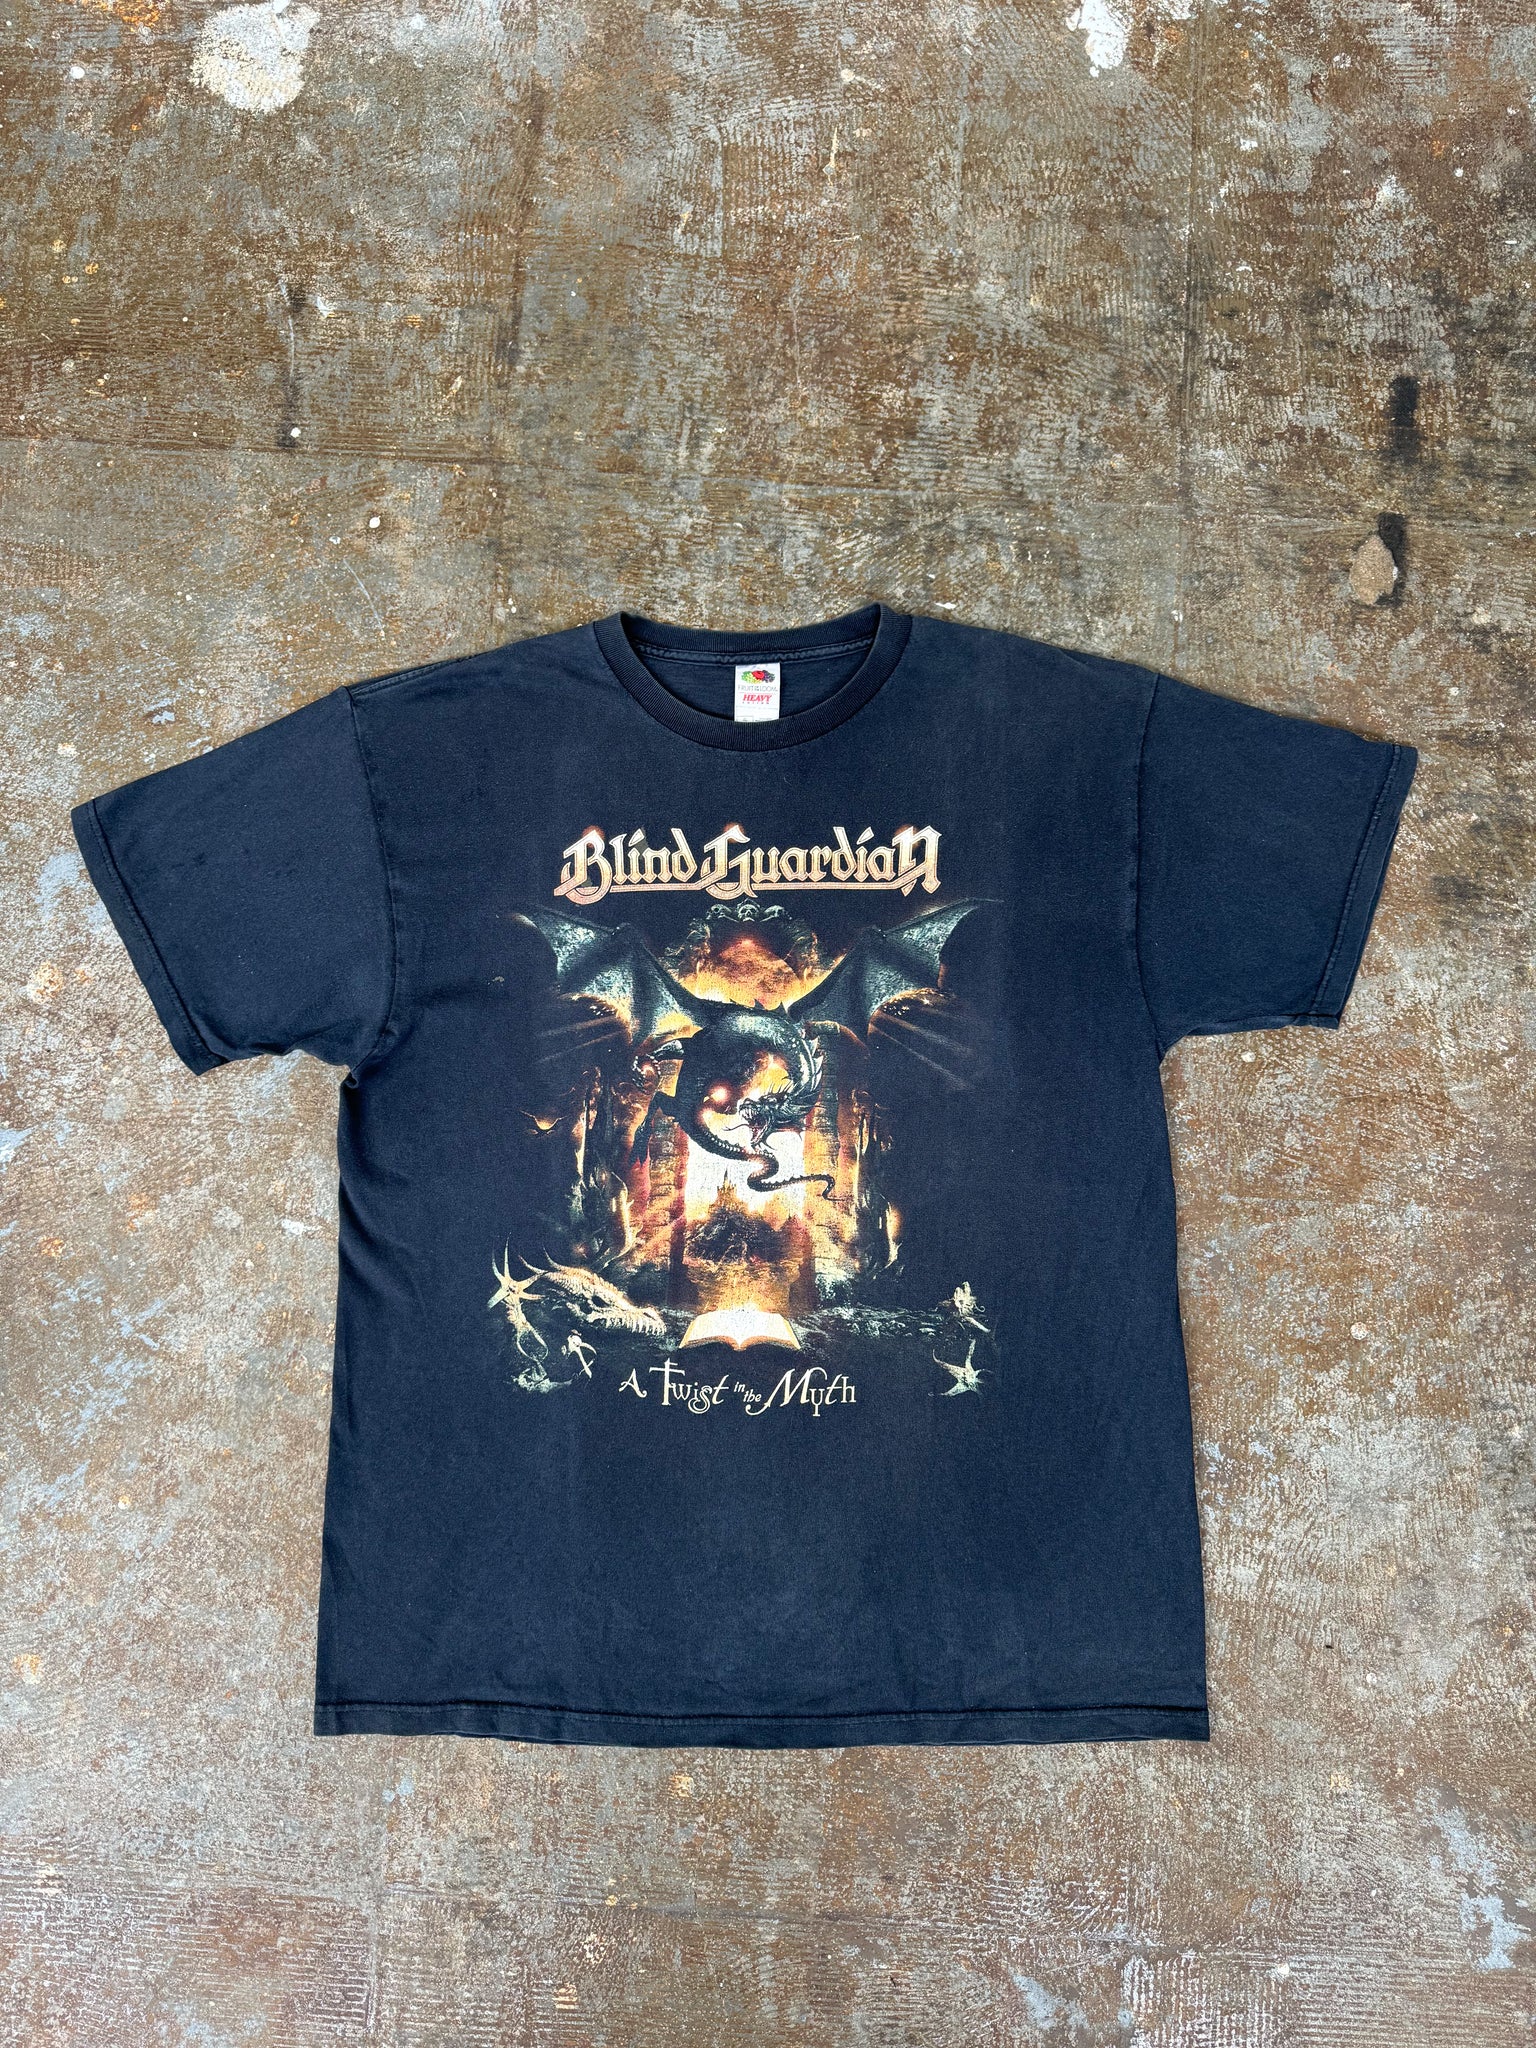 BLIND GUARDIAN A TWIST IN THE MYTH T-SHIRT